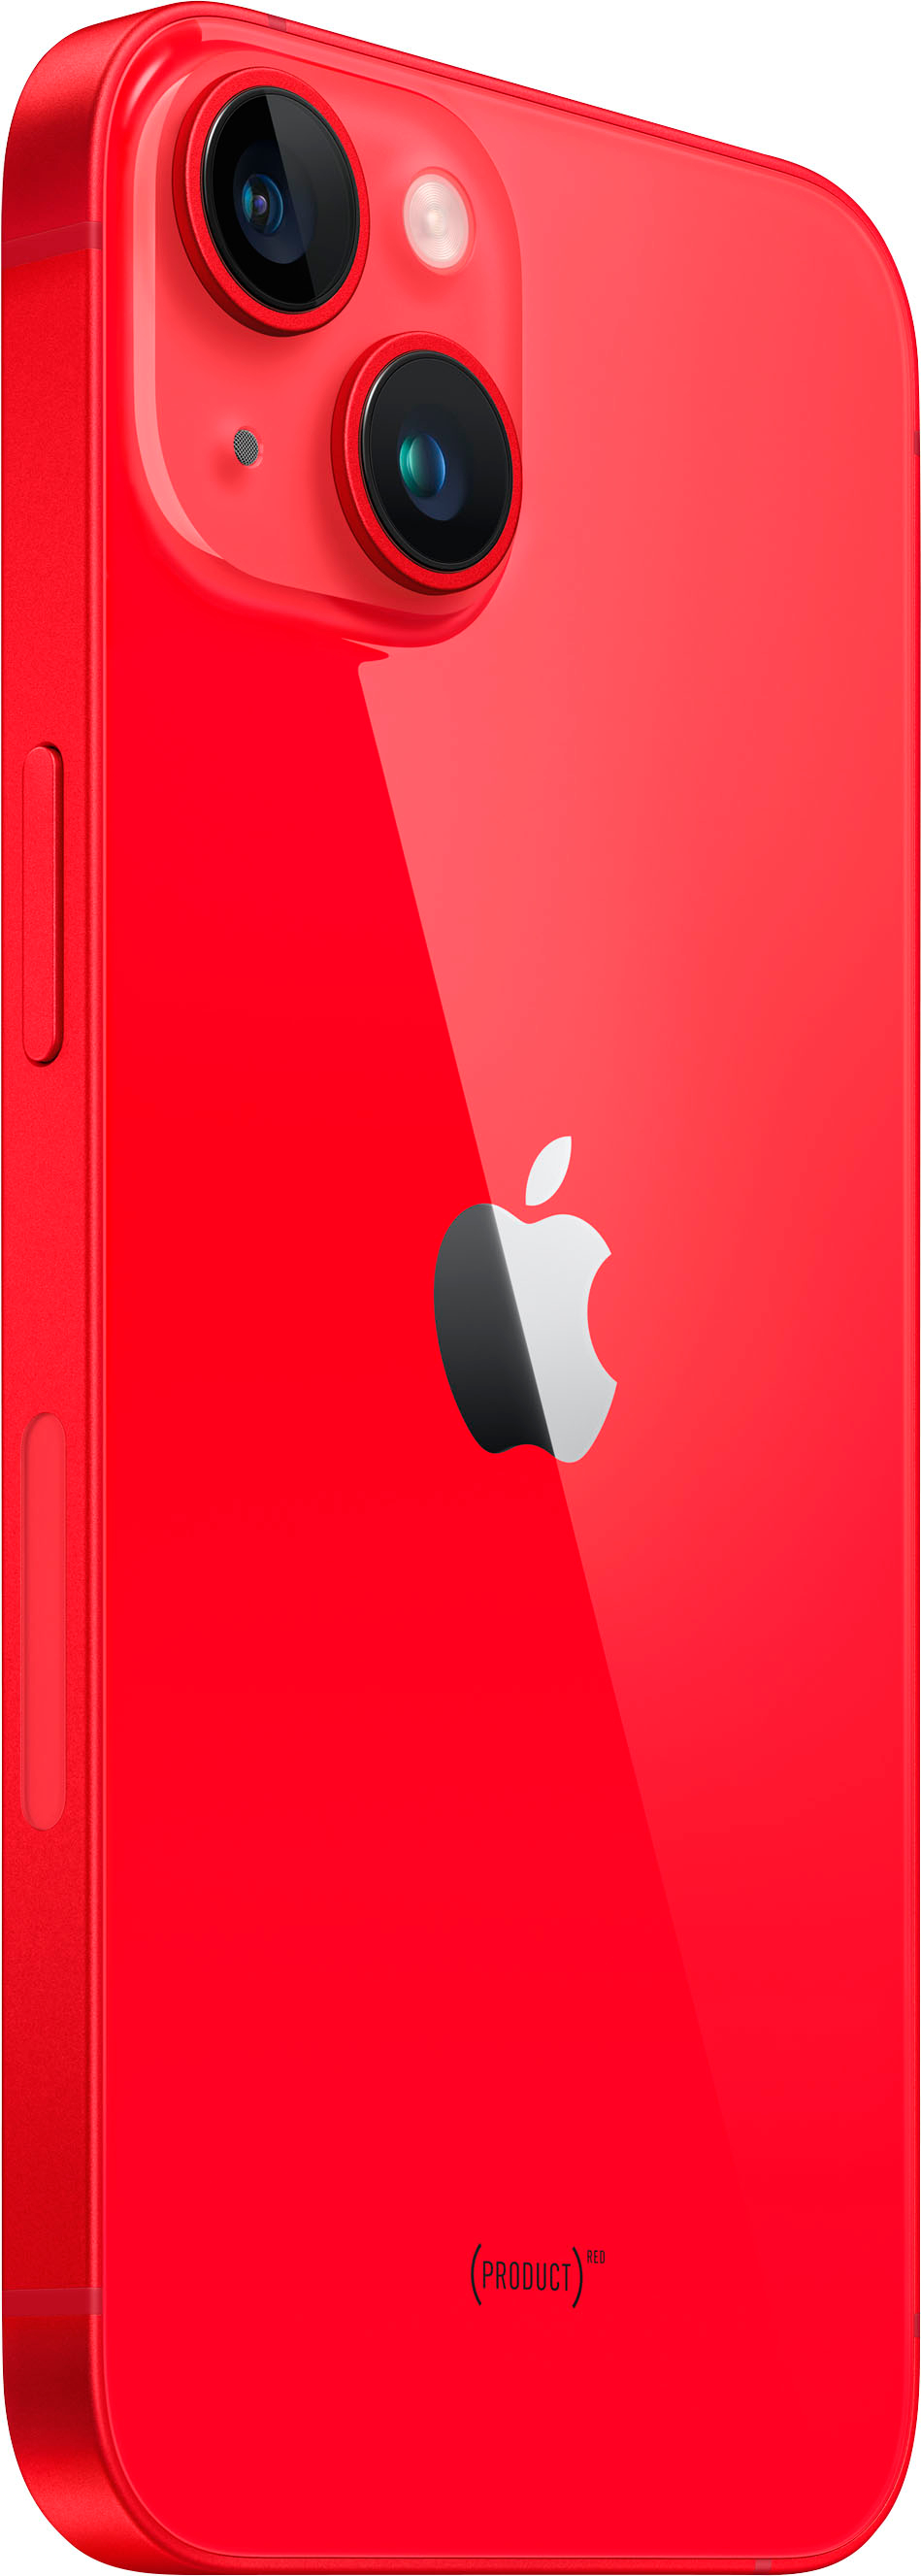 Apple iPhone 14 128GB (PRODUCT)RED (Verizon) MPV73LL/A - Best Buy